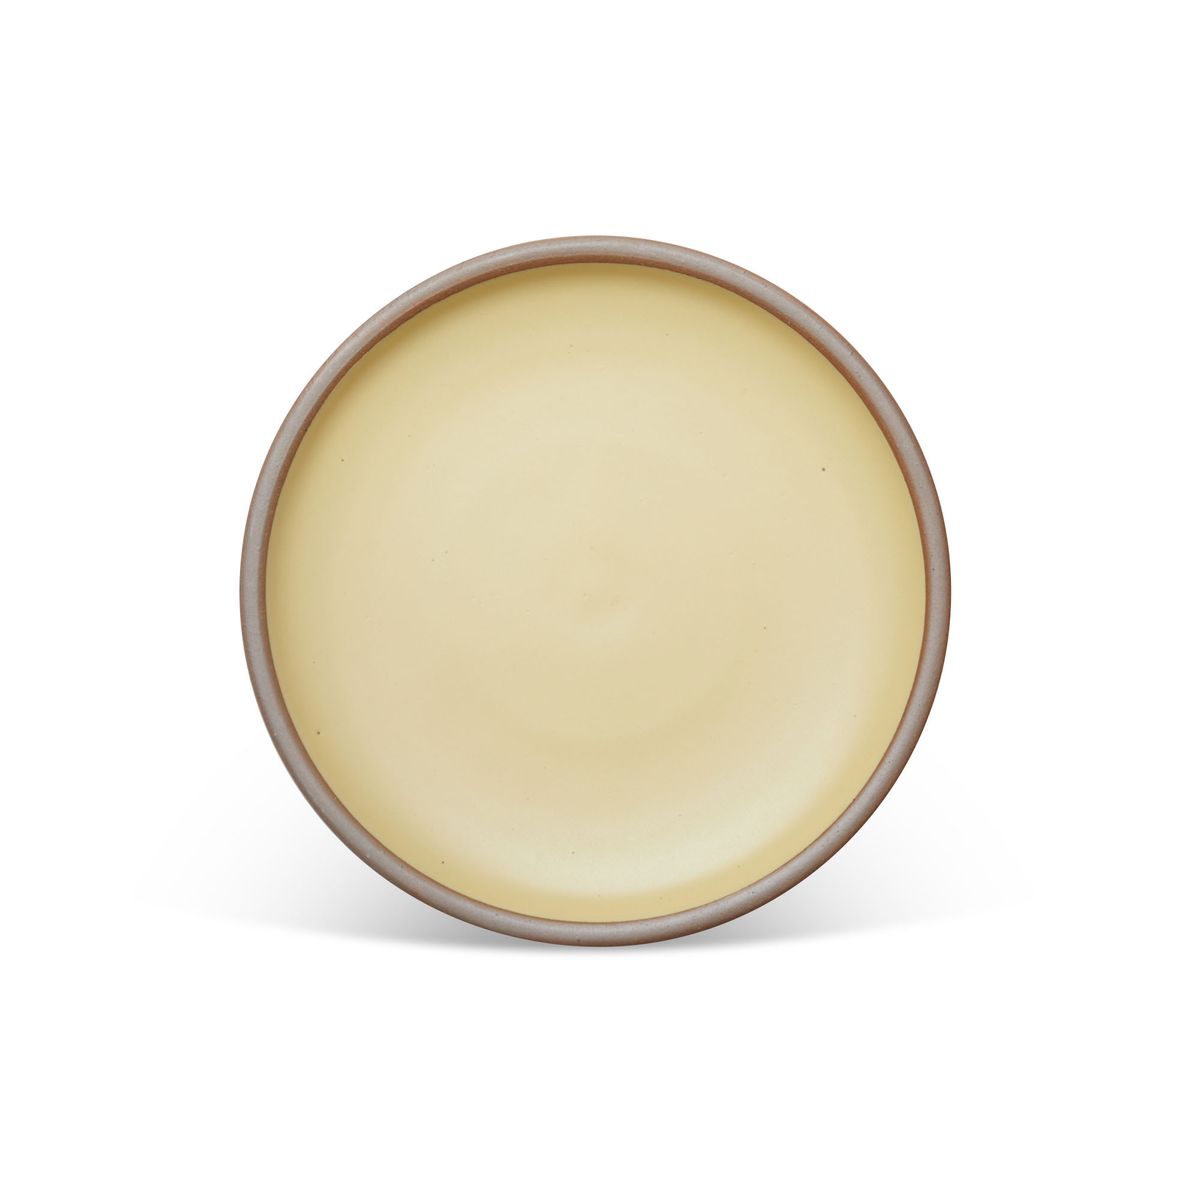 A dinner sized ceramic plate in a light butter yellow color featuring iron speckles and an unglazed rim